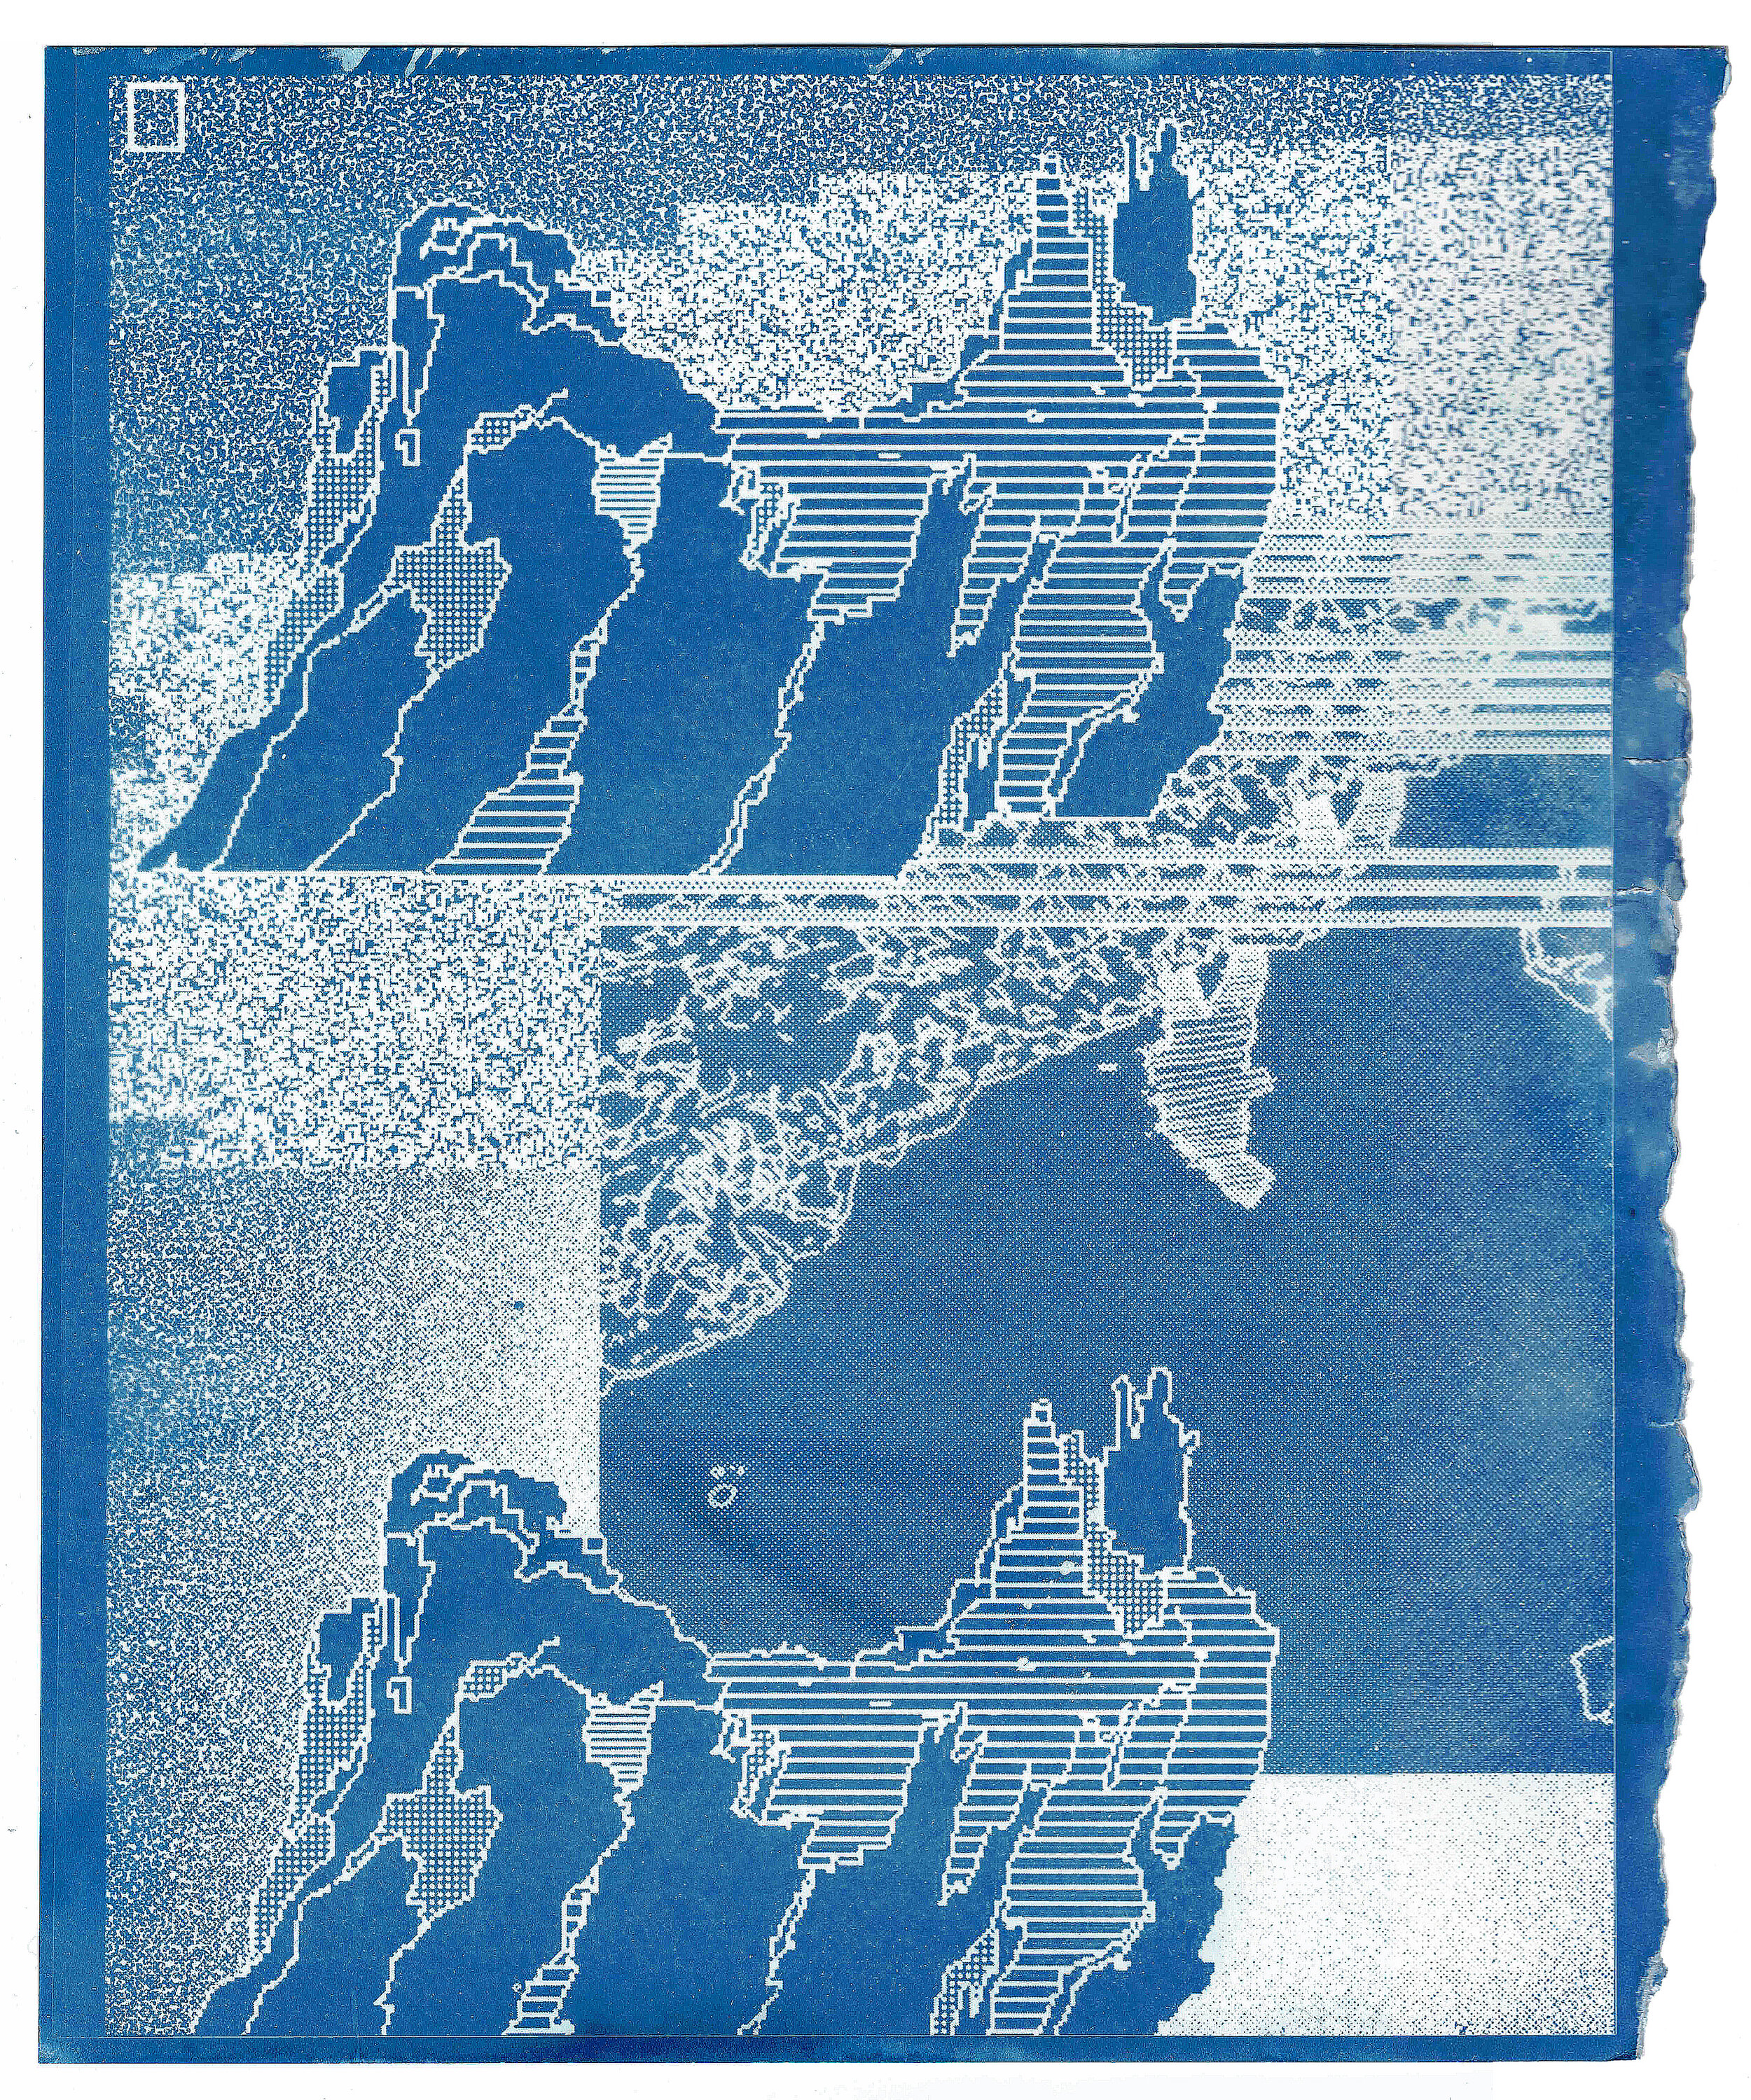   Wooly Mouth Agape [Scrap]  cyanotype on bristol 10.875 x 9 inches 2021 